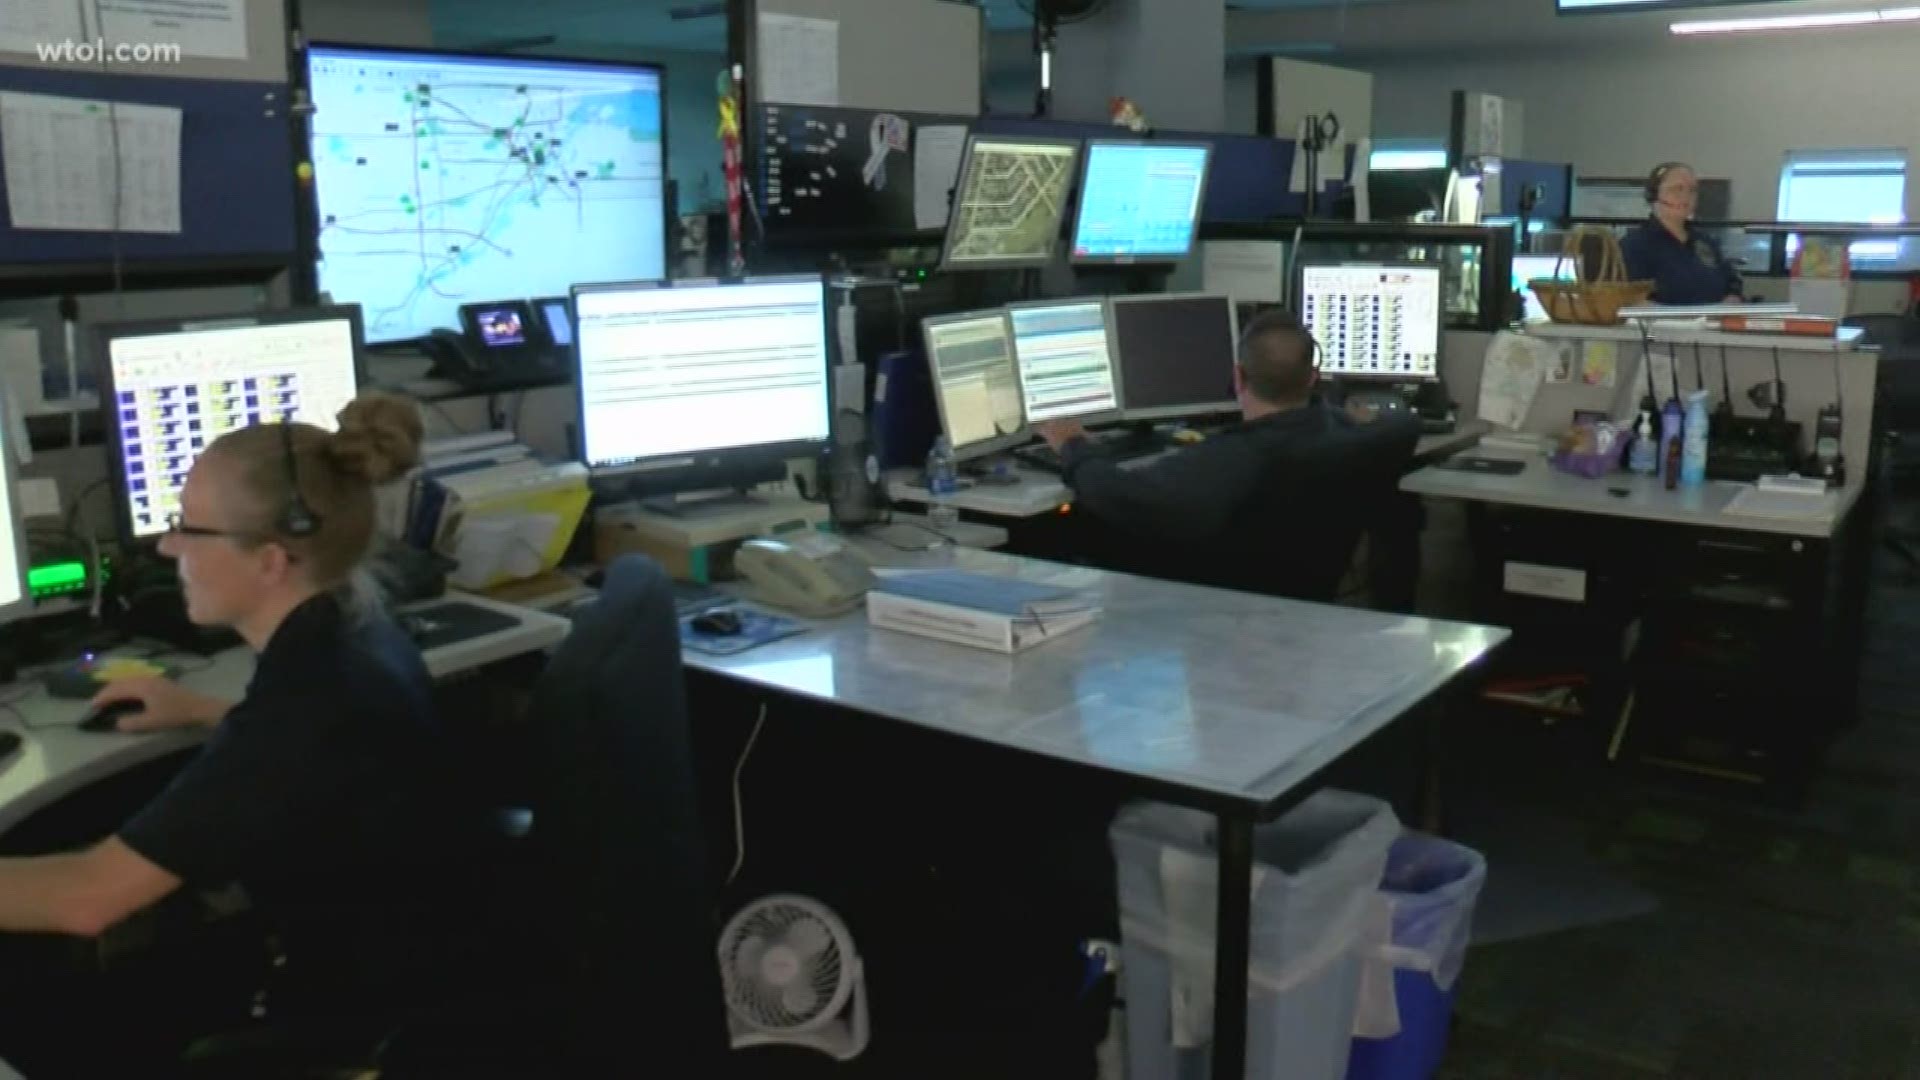 Non-urgent calls to 911 cost money and time. An effort is underway to make sure people with non-urgent needs have those needs met by other organizations.